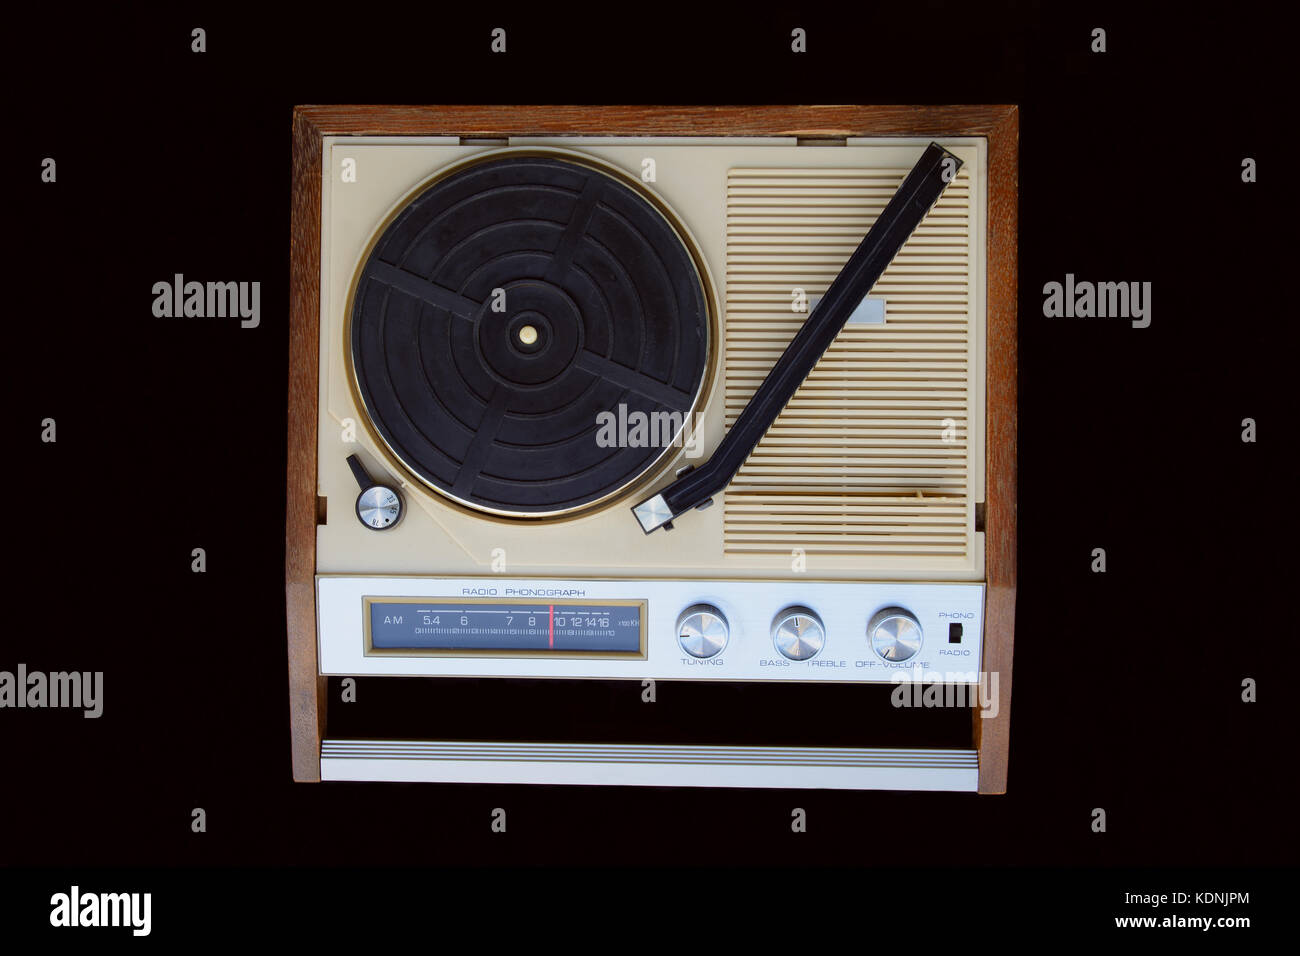 Old radio-phonograph. Turntable platter, tonearm, AM radio dial, buttons, and switches. The radio-gramophone is isolated on black background. Stock Photo